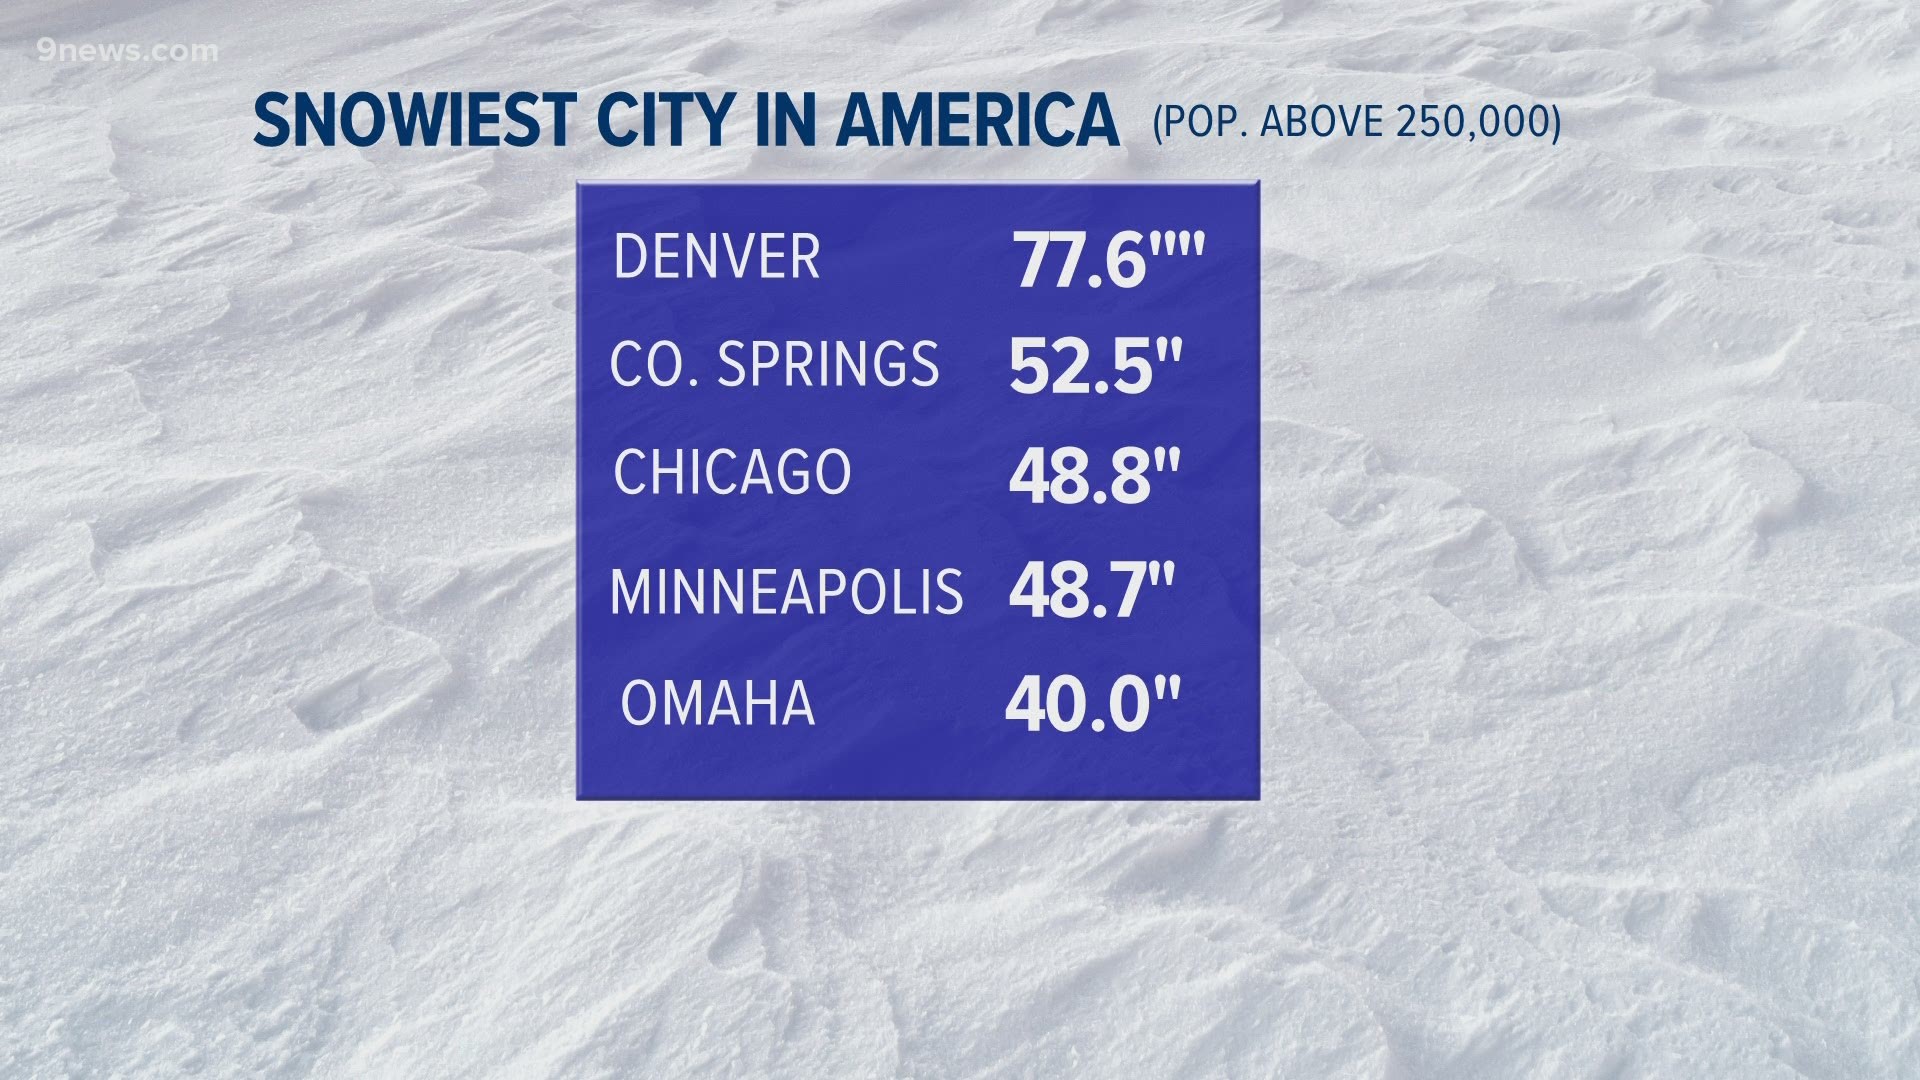 We could also take the title of snowiest large city in America.